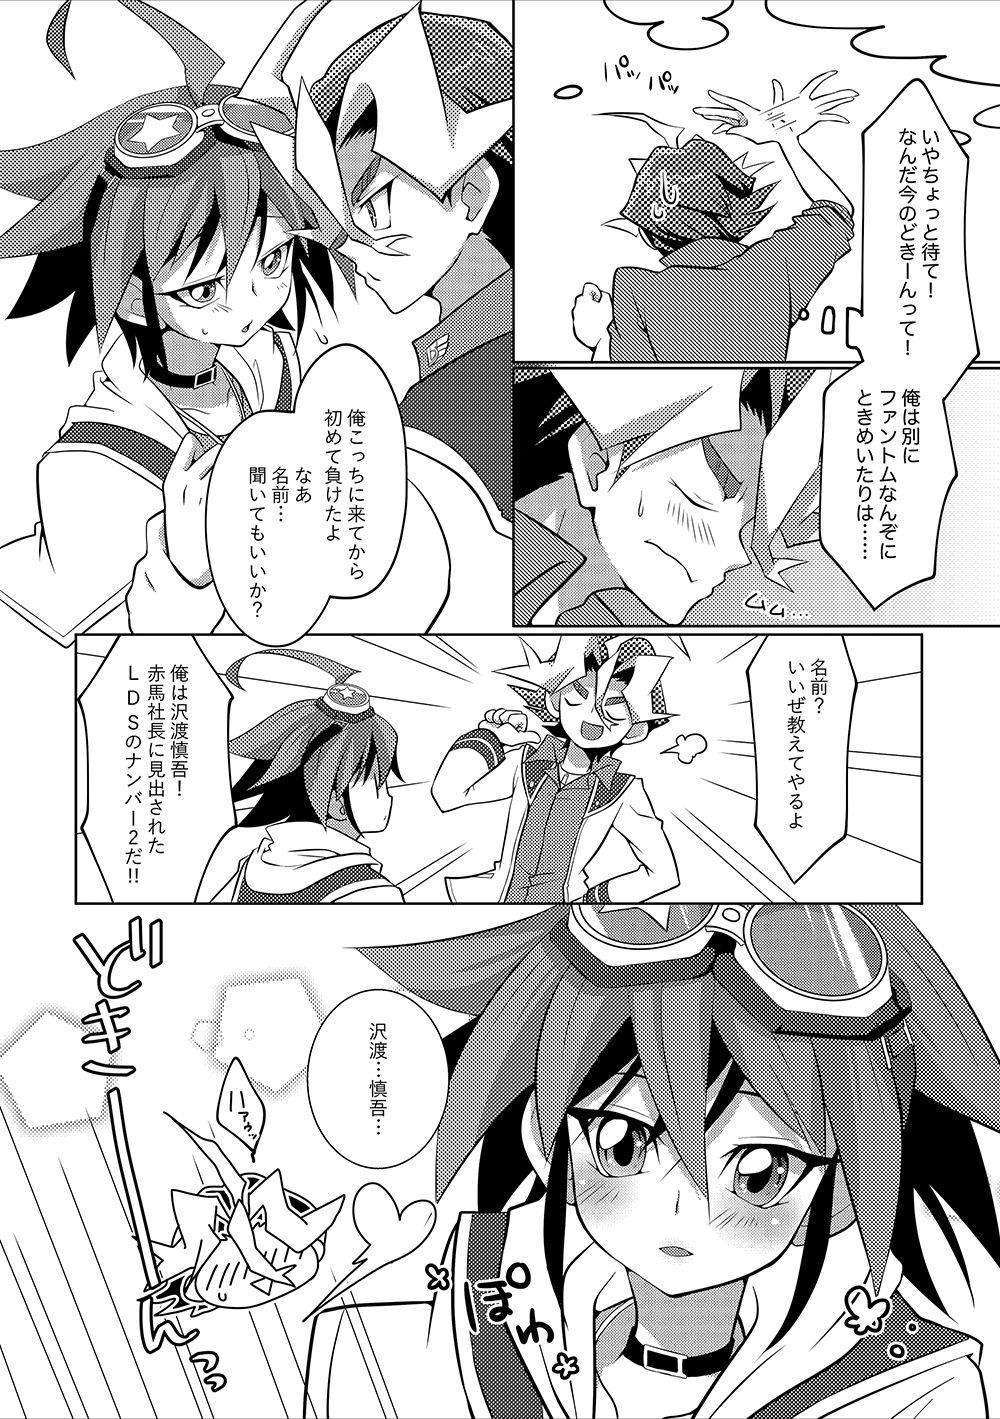 Safadinha SxS H! ANOTHER - Yu gi oh arc v Exhibitionist - Page 5